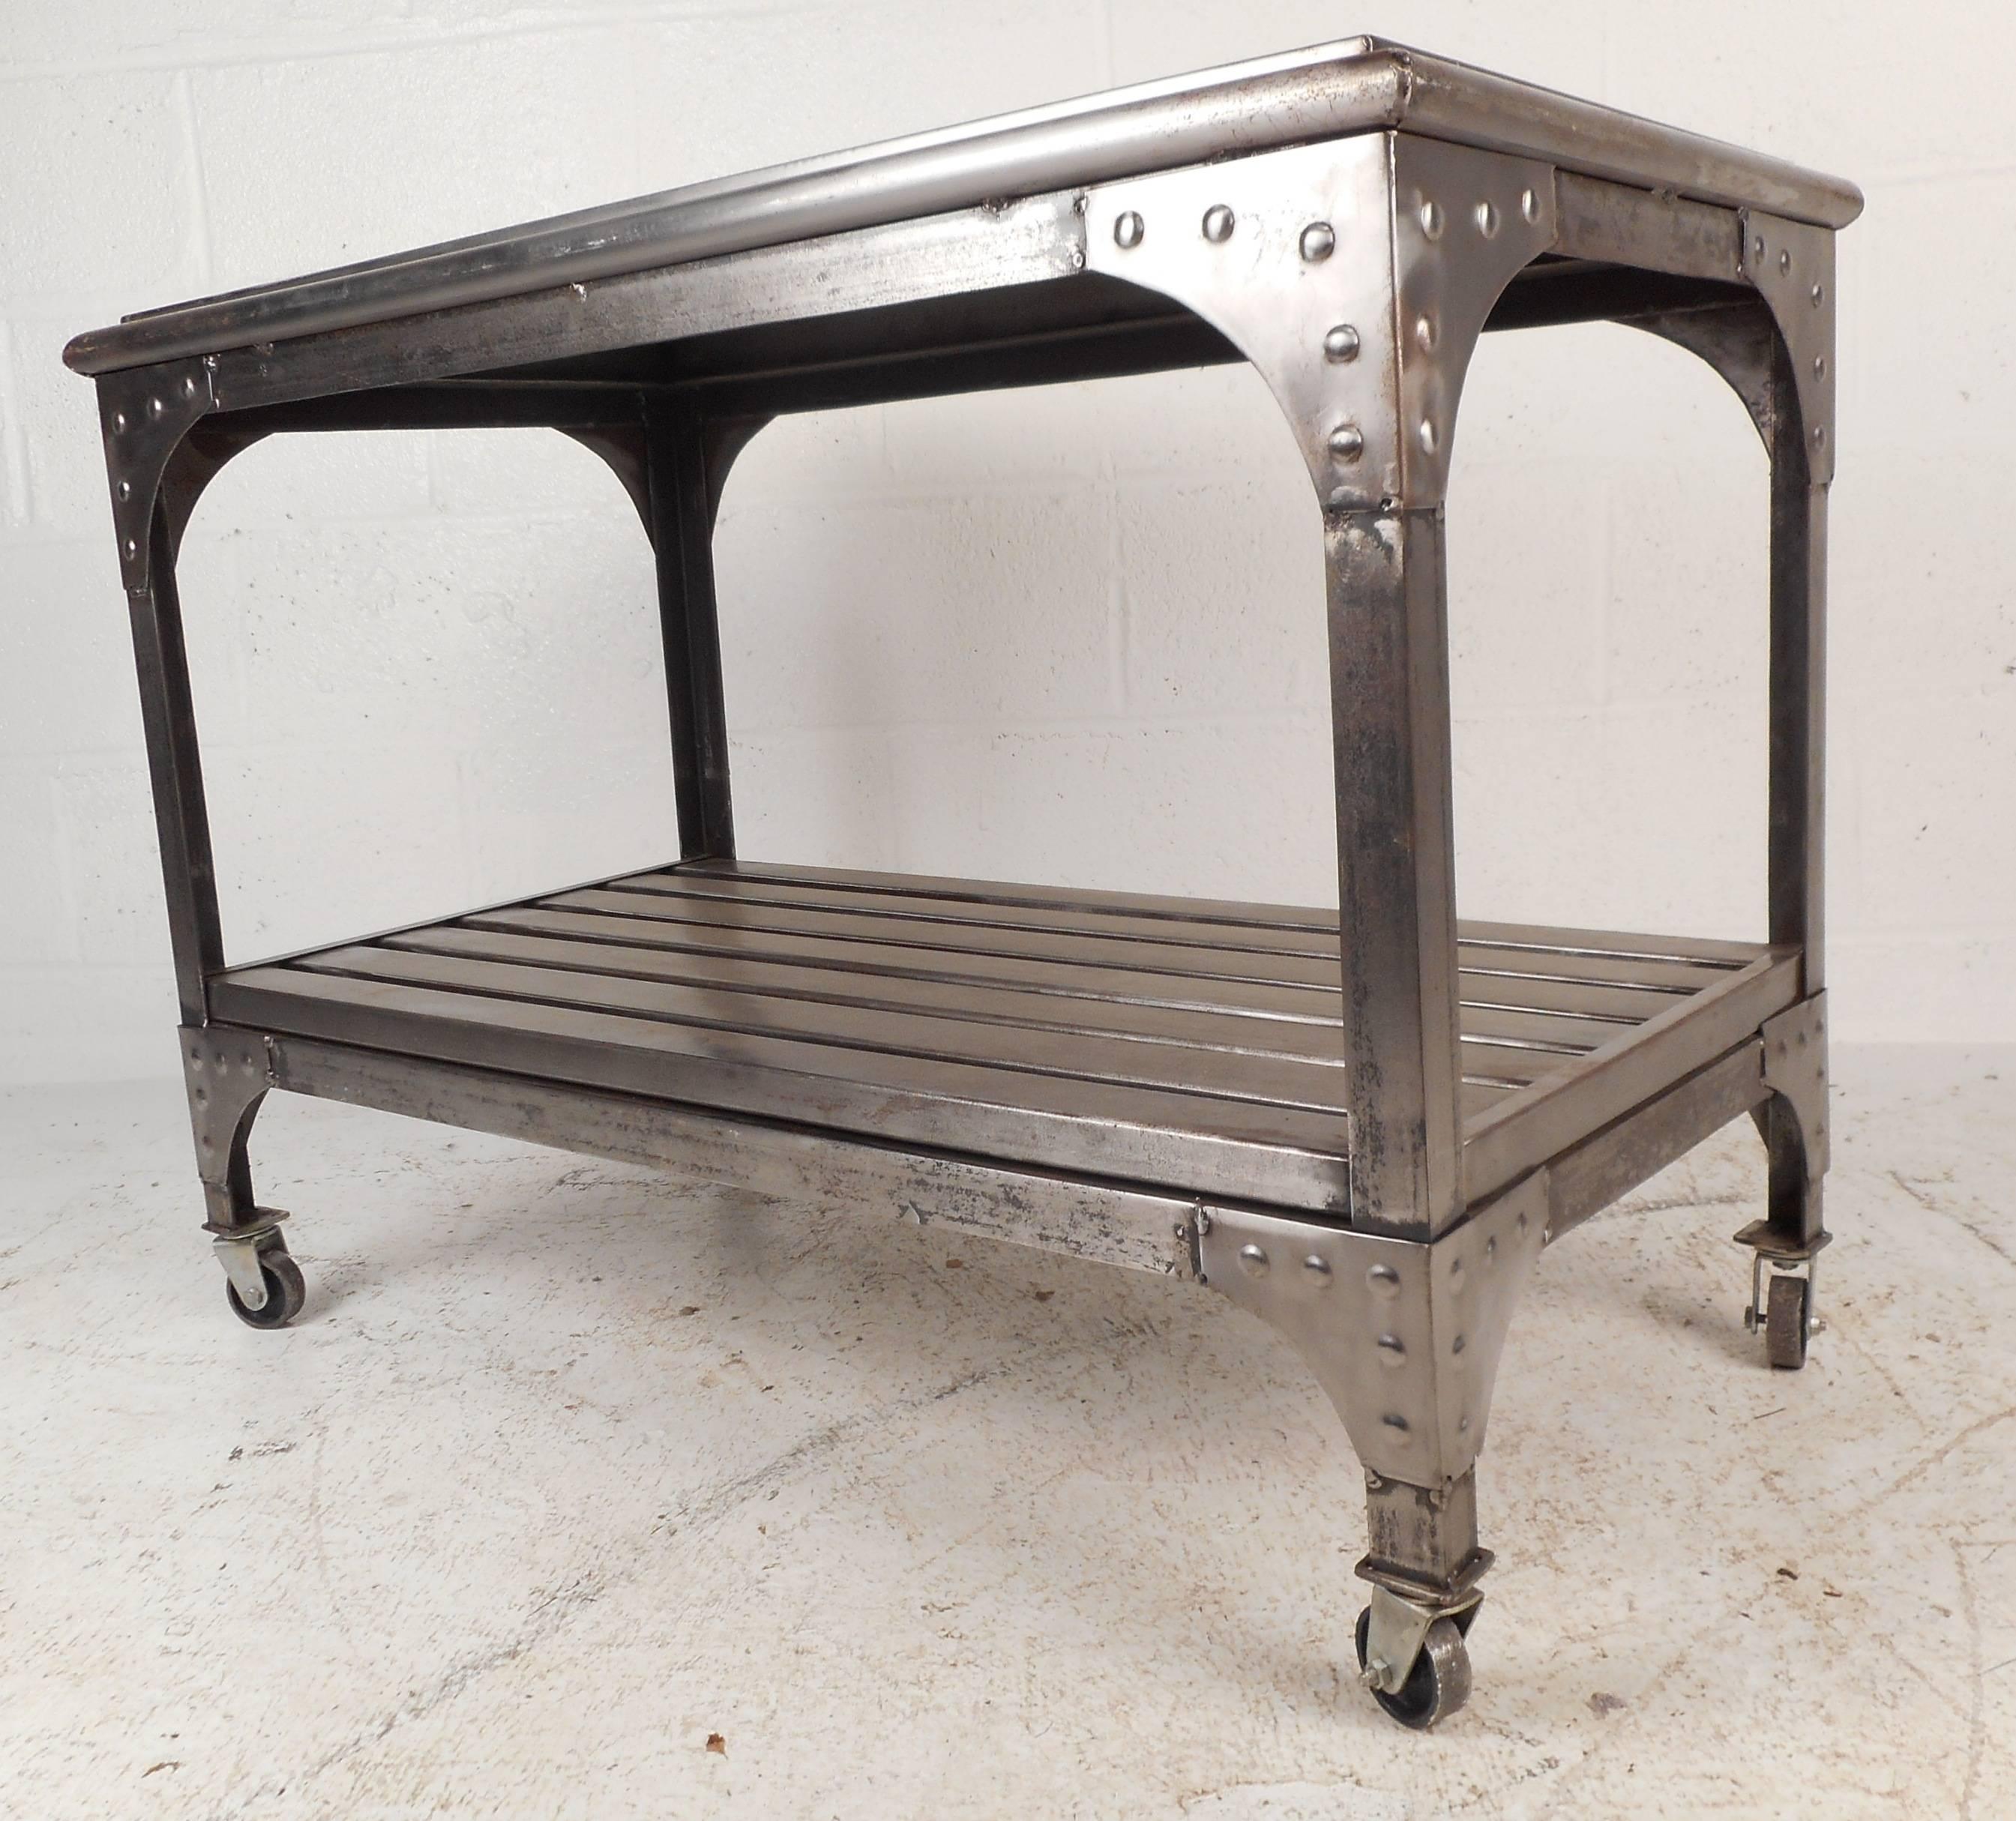 This vintage Industrial metal cart features two tiers for storage and a unique sculpted trim on the base. The bottom tier is slatted and the edges are secured with rivets showing quality craftsmanship. The sleek design has rounded edges on the top